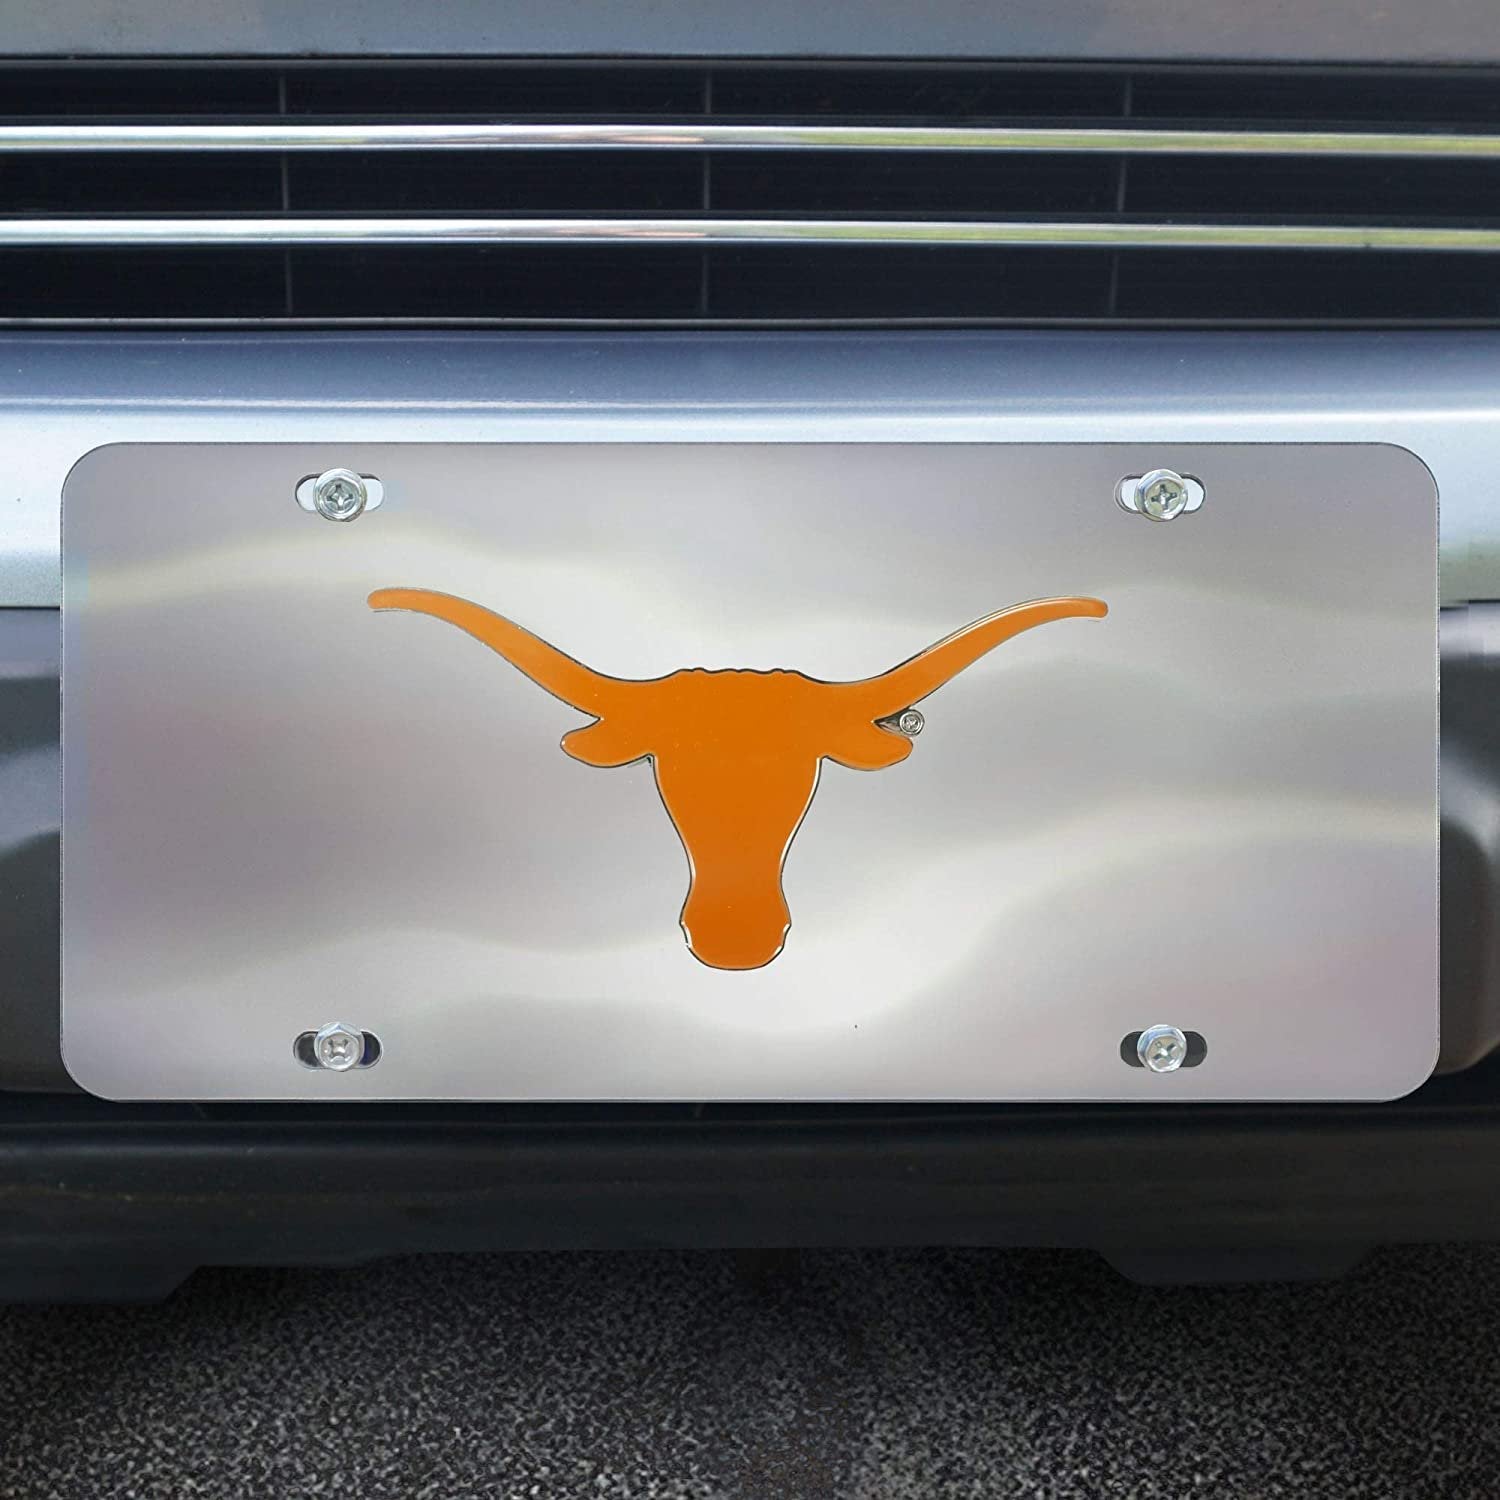 University of Texas Longhorns License Plate Tag, Premium Stainless Steel Diecast, Chrome, Raised Solid Metal Color Emblem, 6x12 Inch